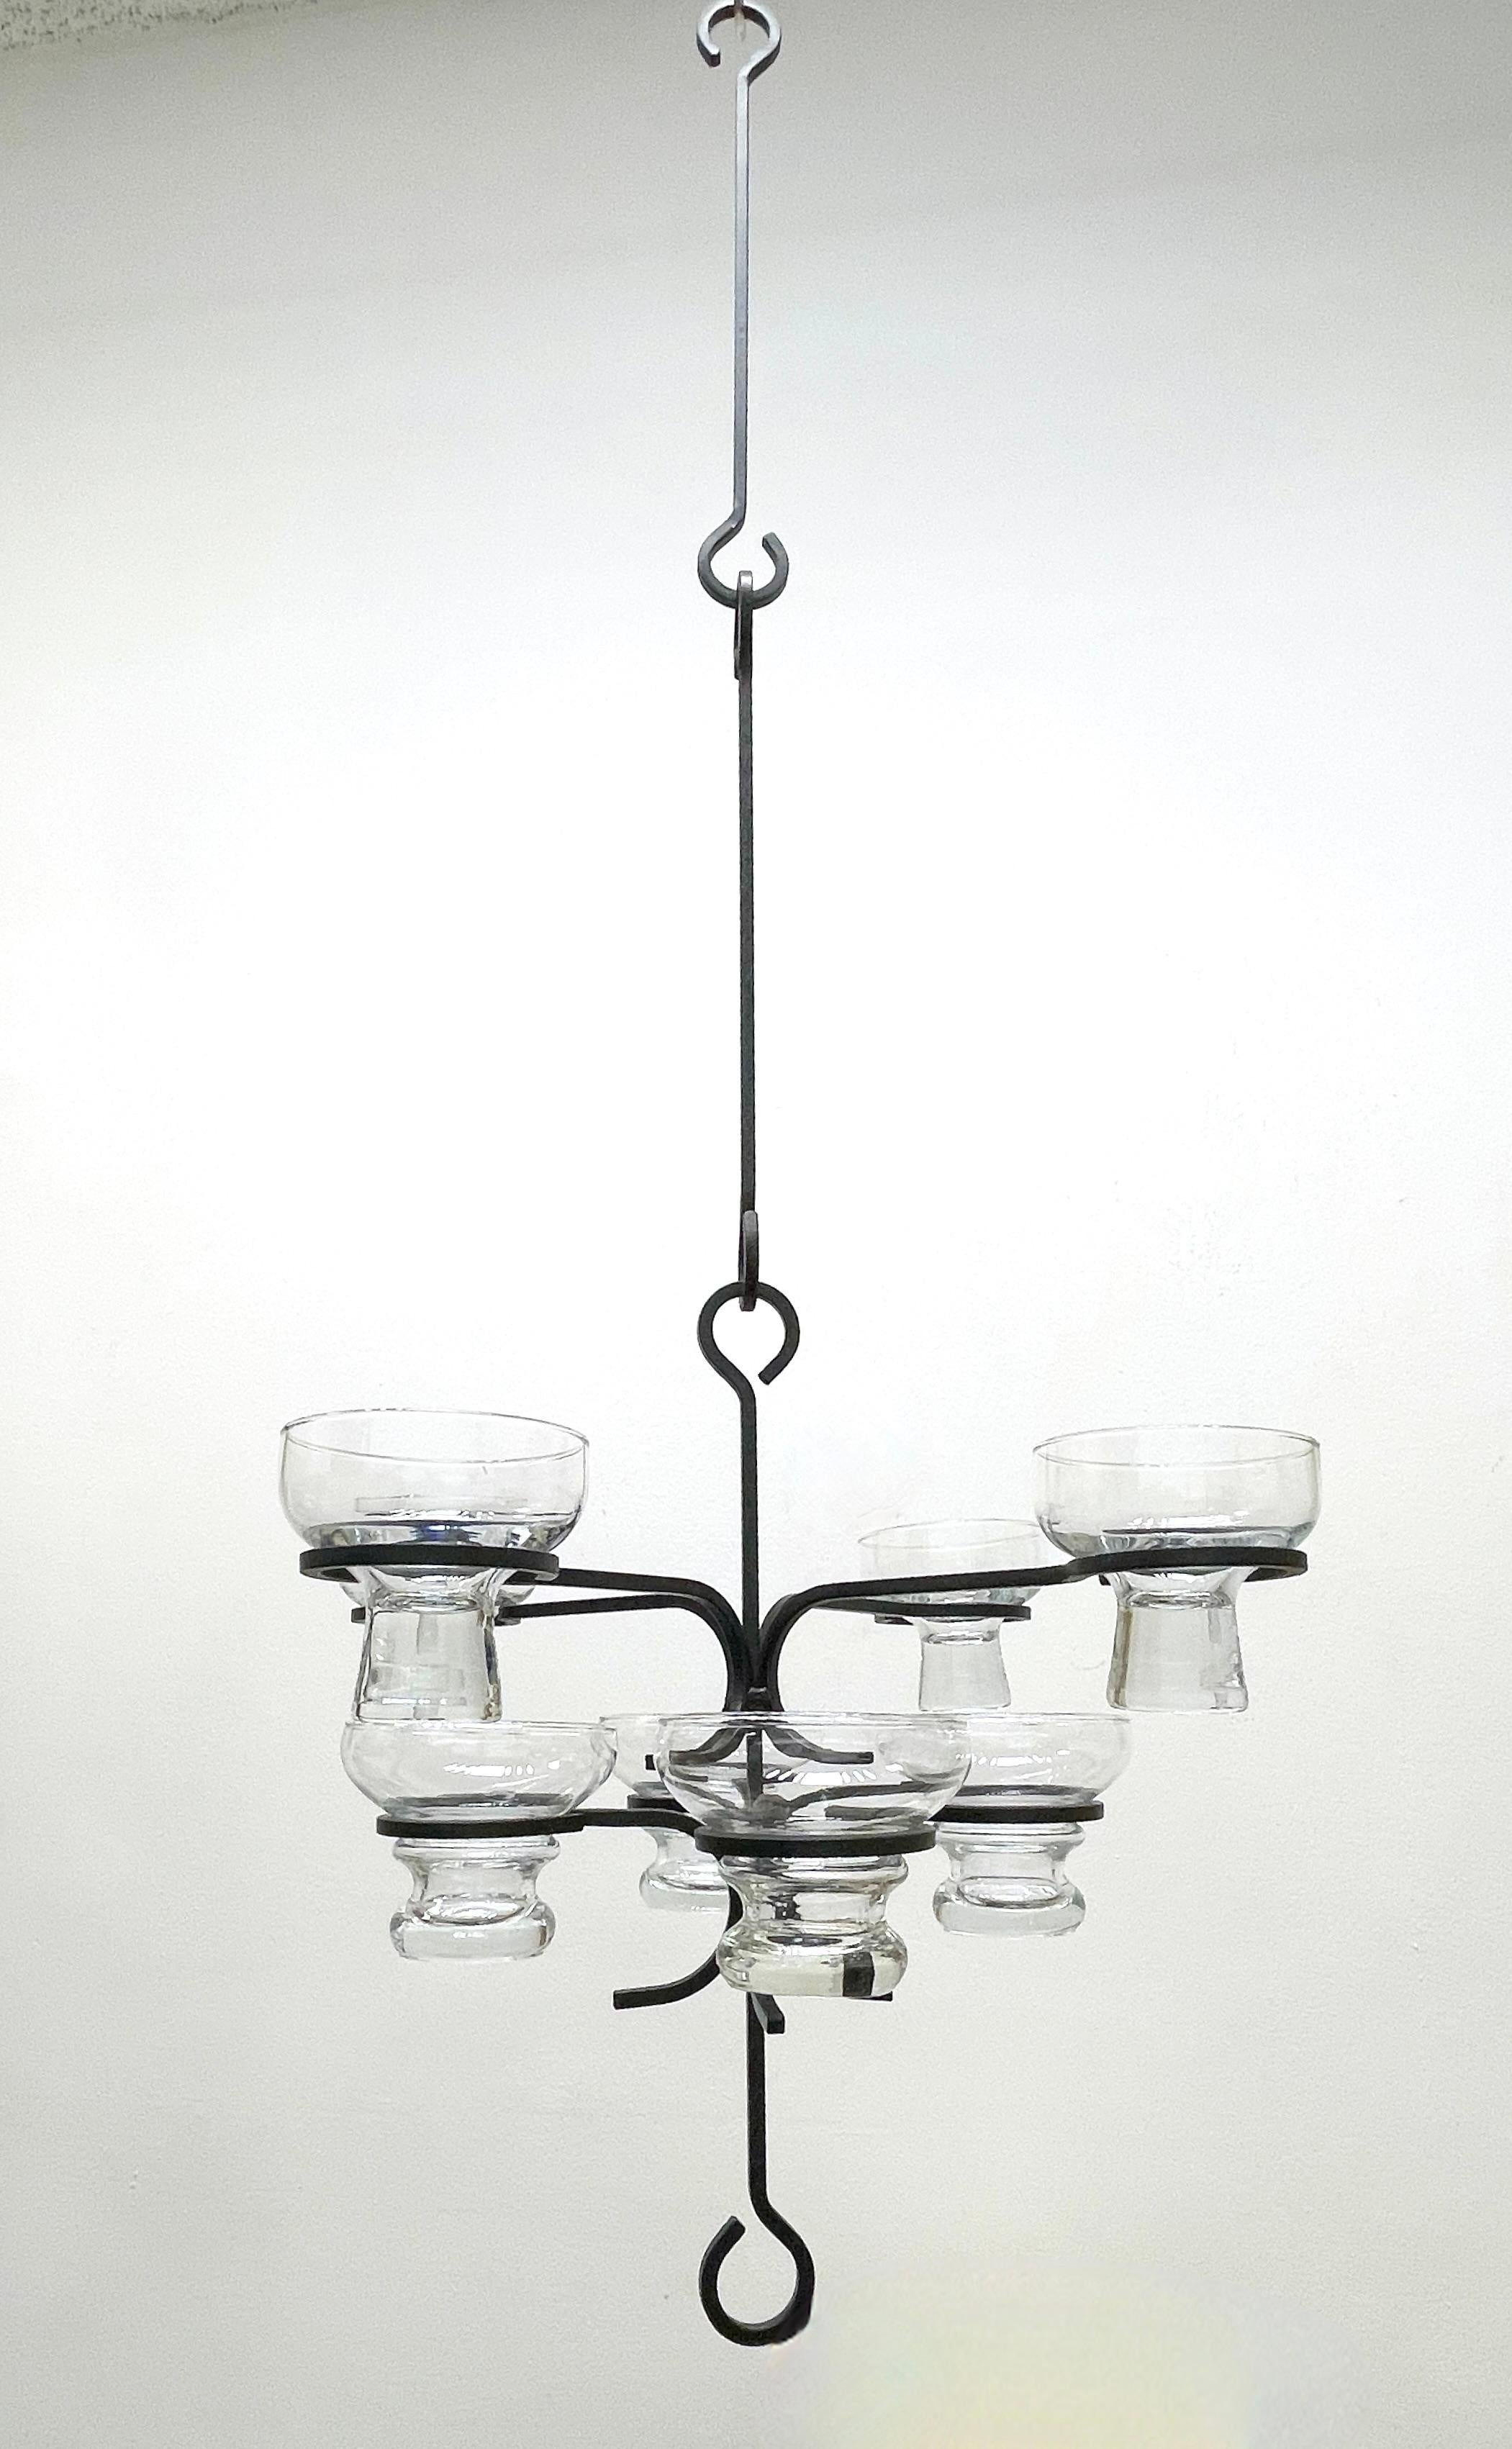 Add a touch of opulence to your home with this charming candle chandelier! This 60s Wrought Iron Chandelier with eight Swedish Art Glasses holds ball globe candles which are not included.
The Chandelier part is approx. 15.25